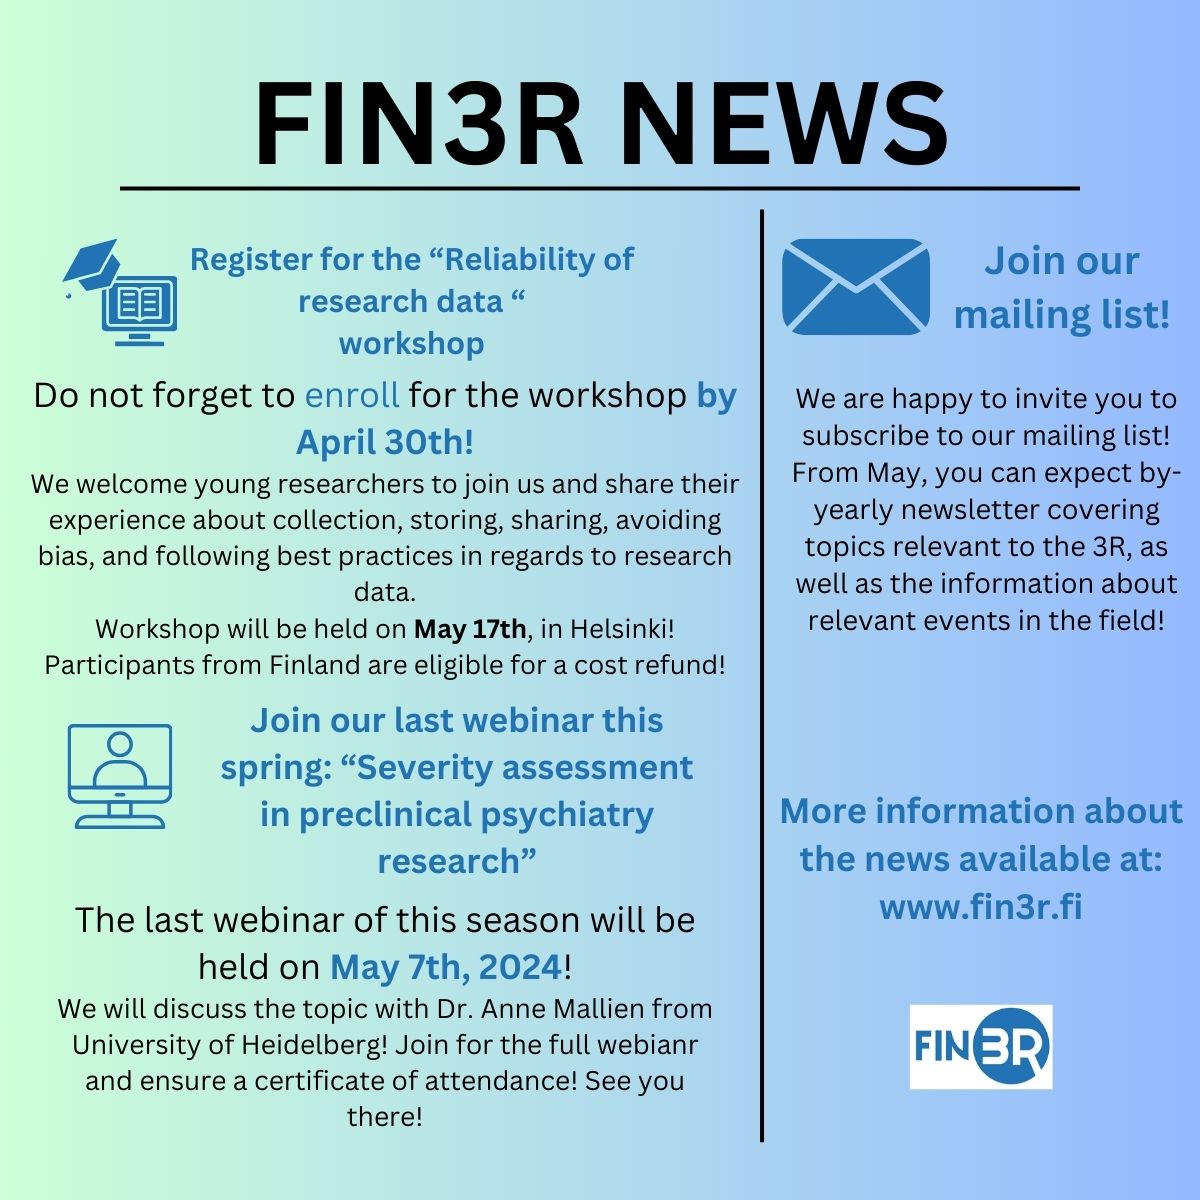 Have you visited our news page recently?? 🌐
✔ #Reliability of #ResearchData Workshop
✔ #SeverityAssessment in Preclinical Psychiatry Research Webinar
✔ Join our mailing list here: lists.tuni.fi/mailman/listin…

Find more information on our website ➡ fin3r.fi/en/news 

#3Rs